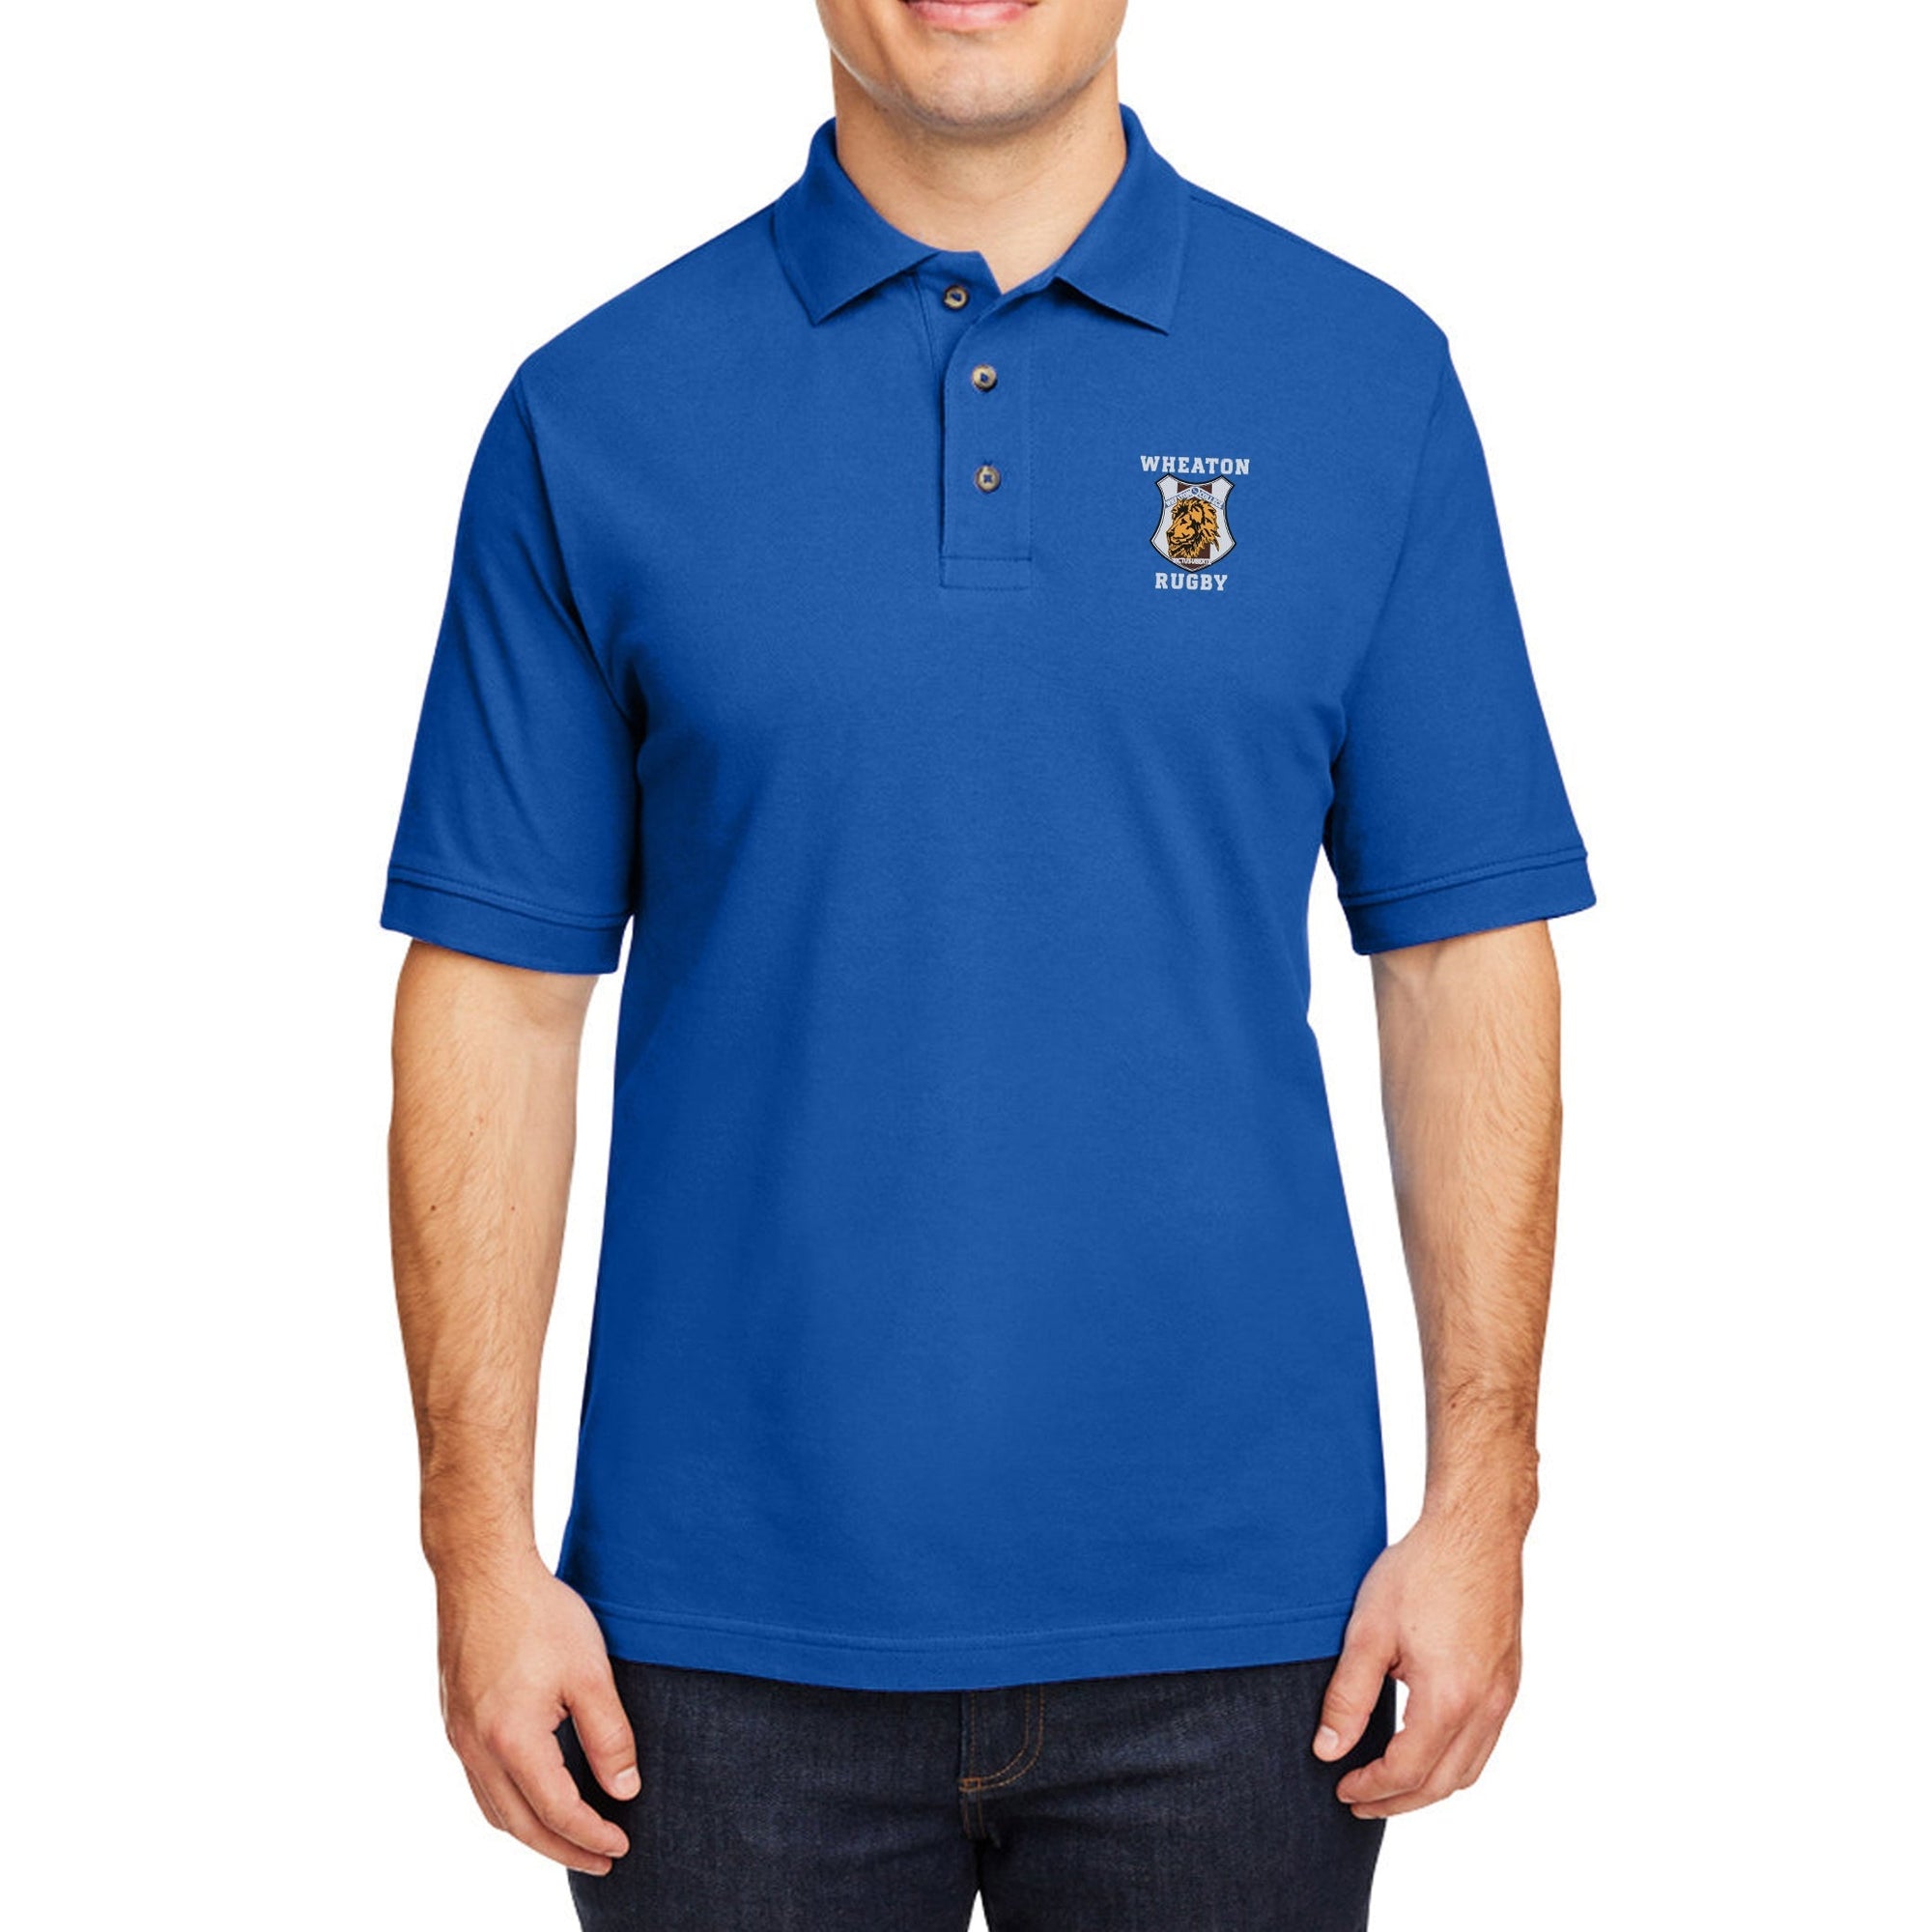 Rugby Imports Wheaton Cotton Polo